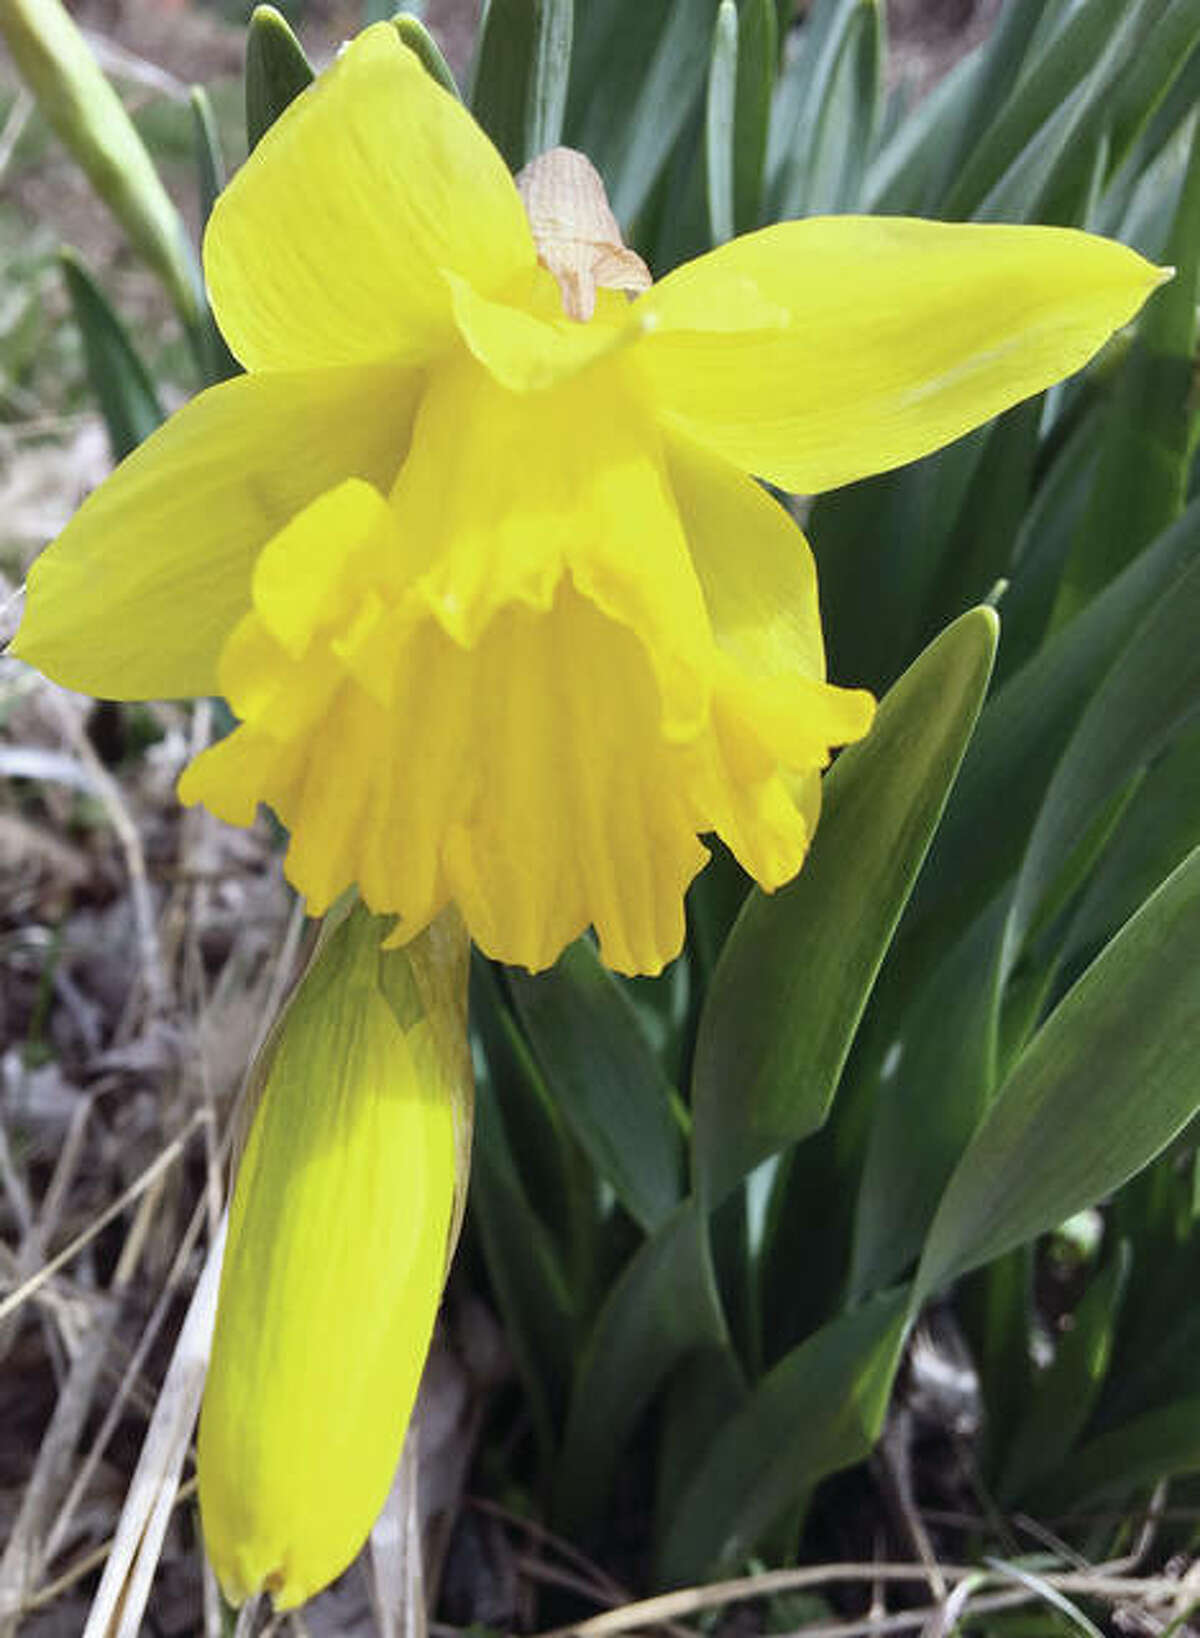 A daffodil overcomes recent winter weather to bloom, suggesting warmer days are ahead.